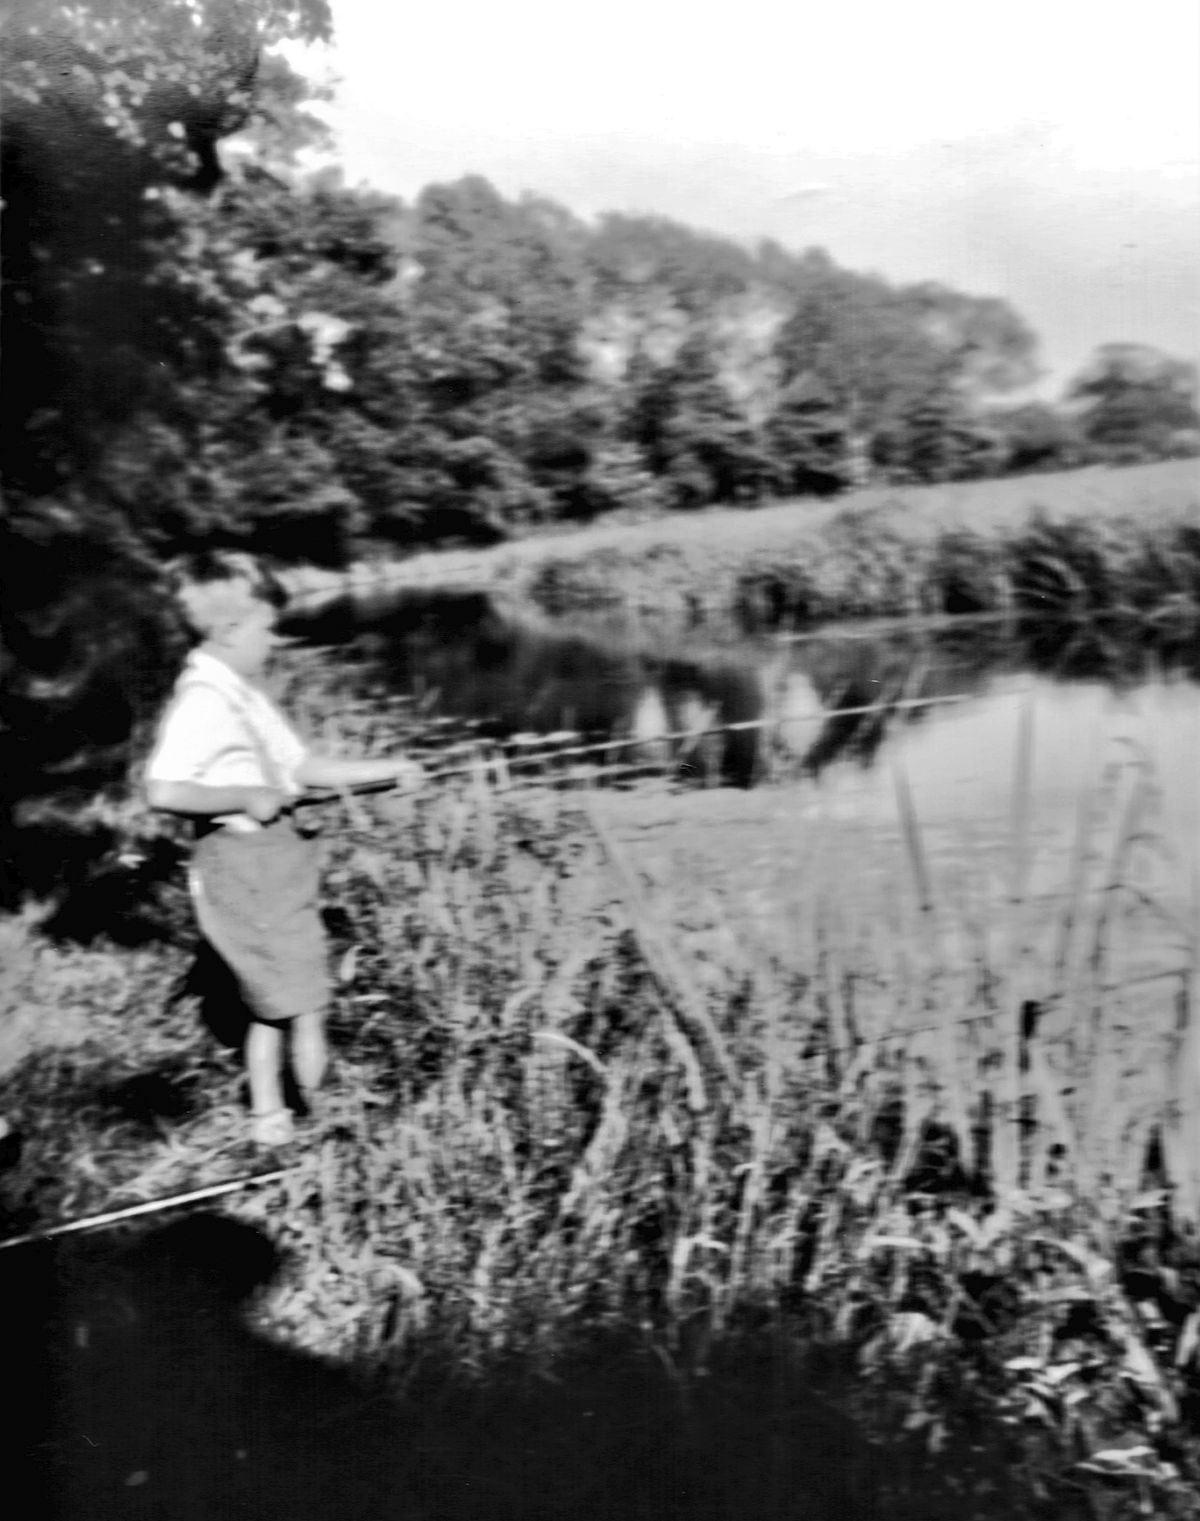 The start of it all for five-year-old Derek, fishing on the River Tern near Wellington in 1947.